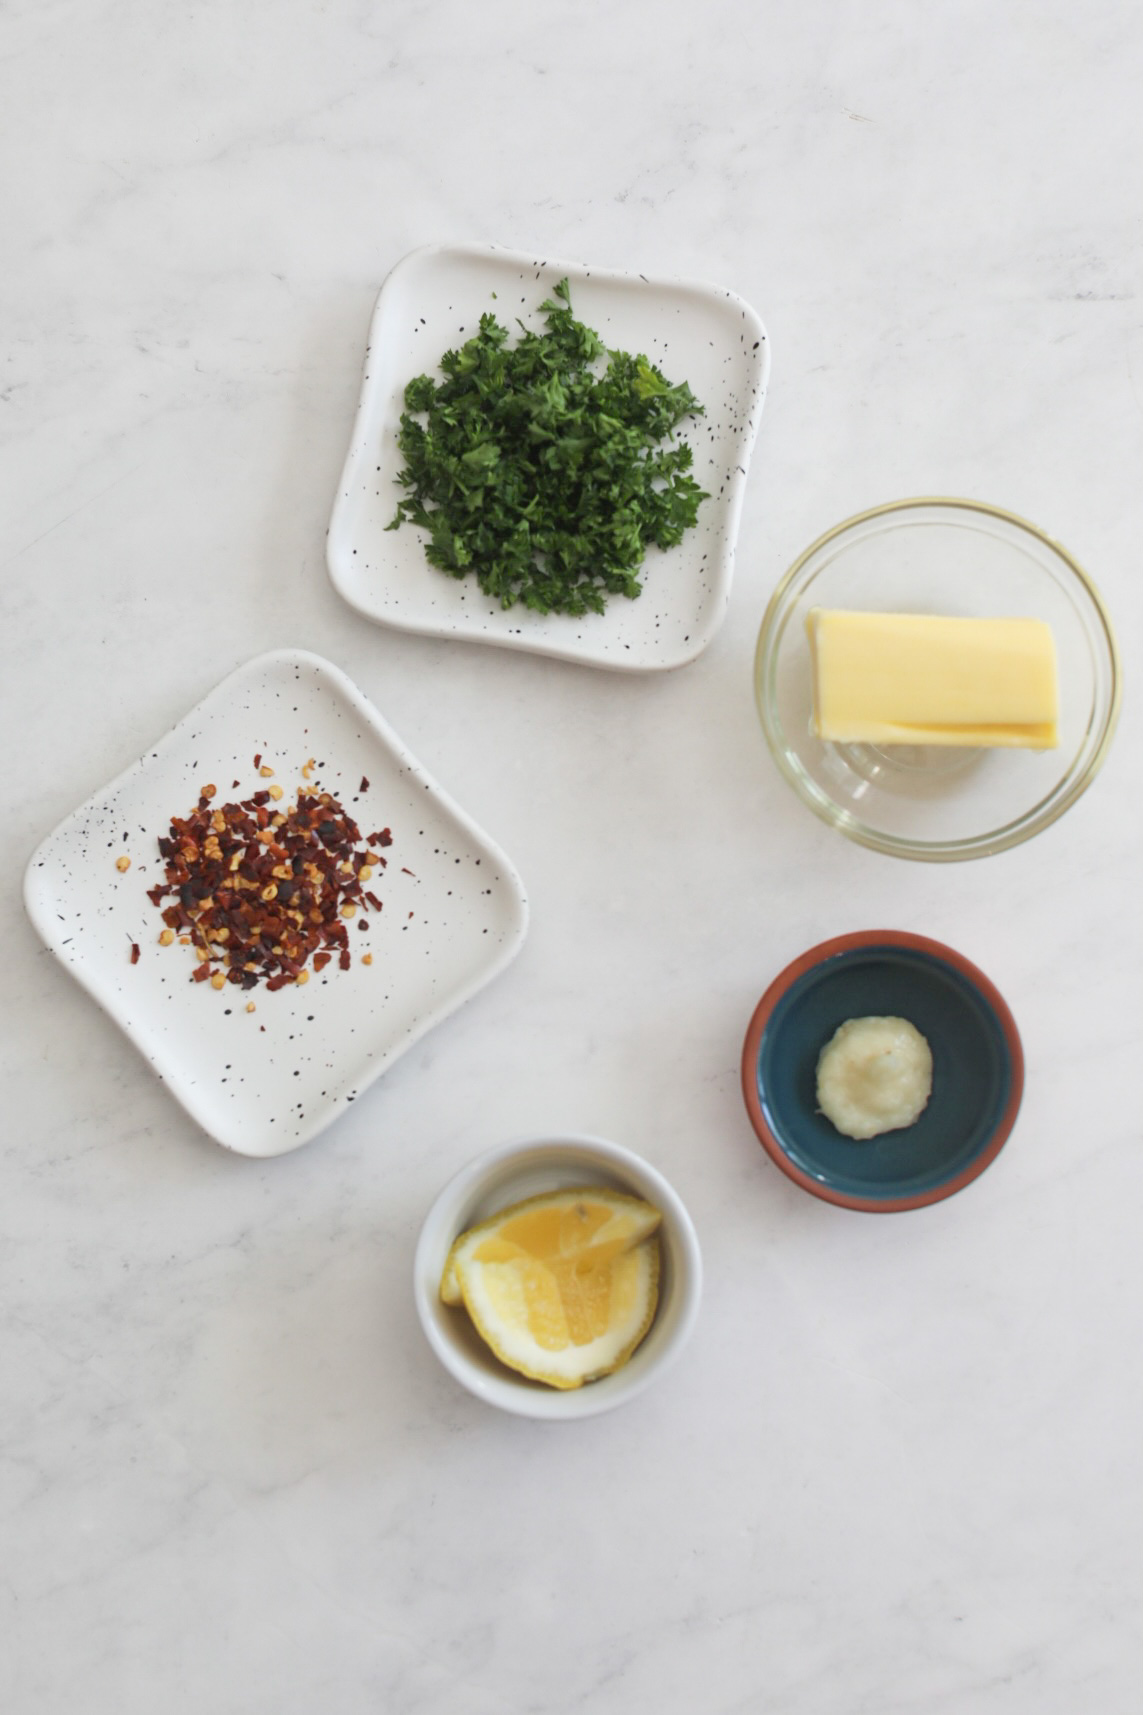 Garlic butter sauce ingredients in a flat lay style. Two white plates with black spots are filled with chopped parsley and crushed red pepper flakes. A small glass bowl of butter, two lemon slices and garlic paste are added as well.